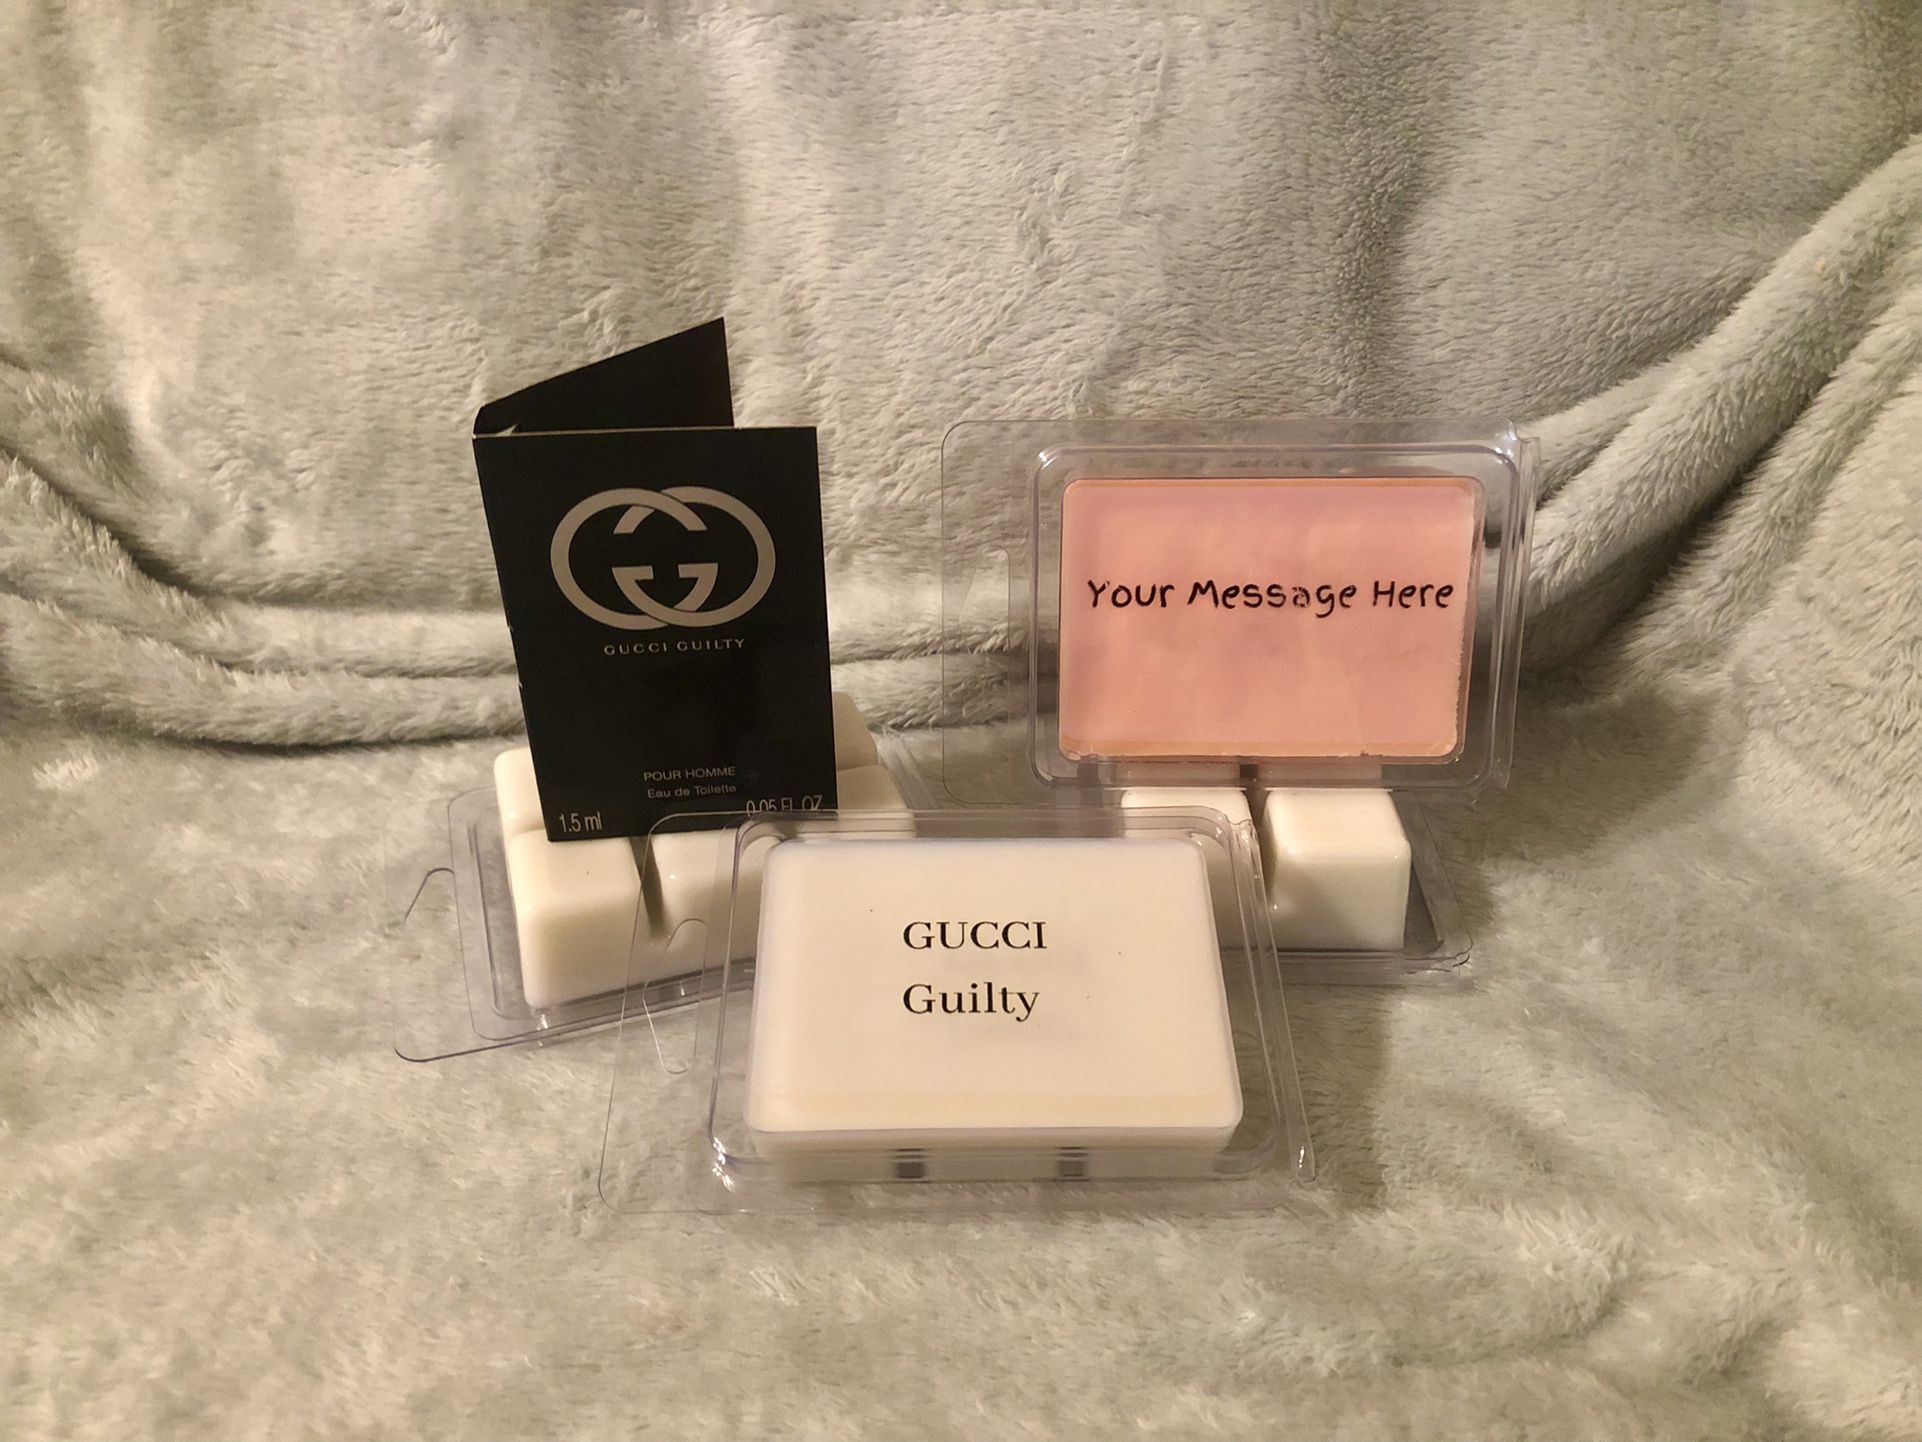 Gucci Guilty Fragrance Wax Melts